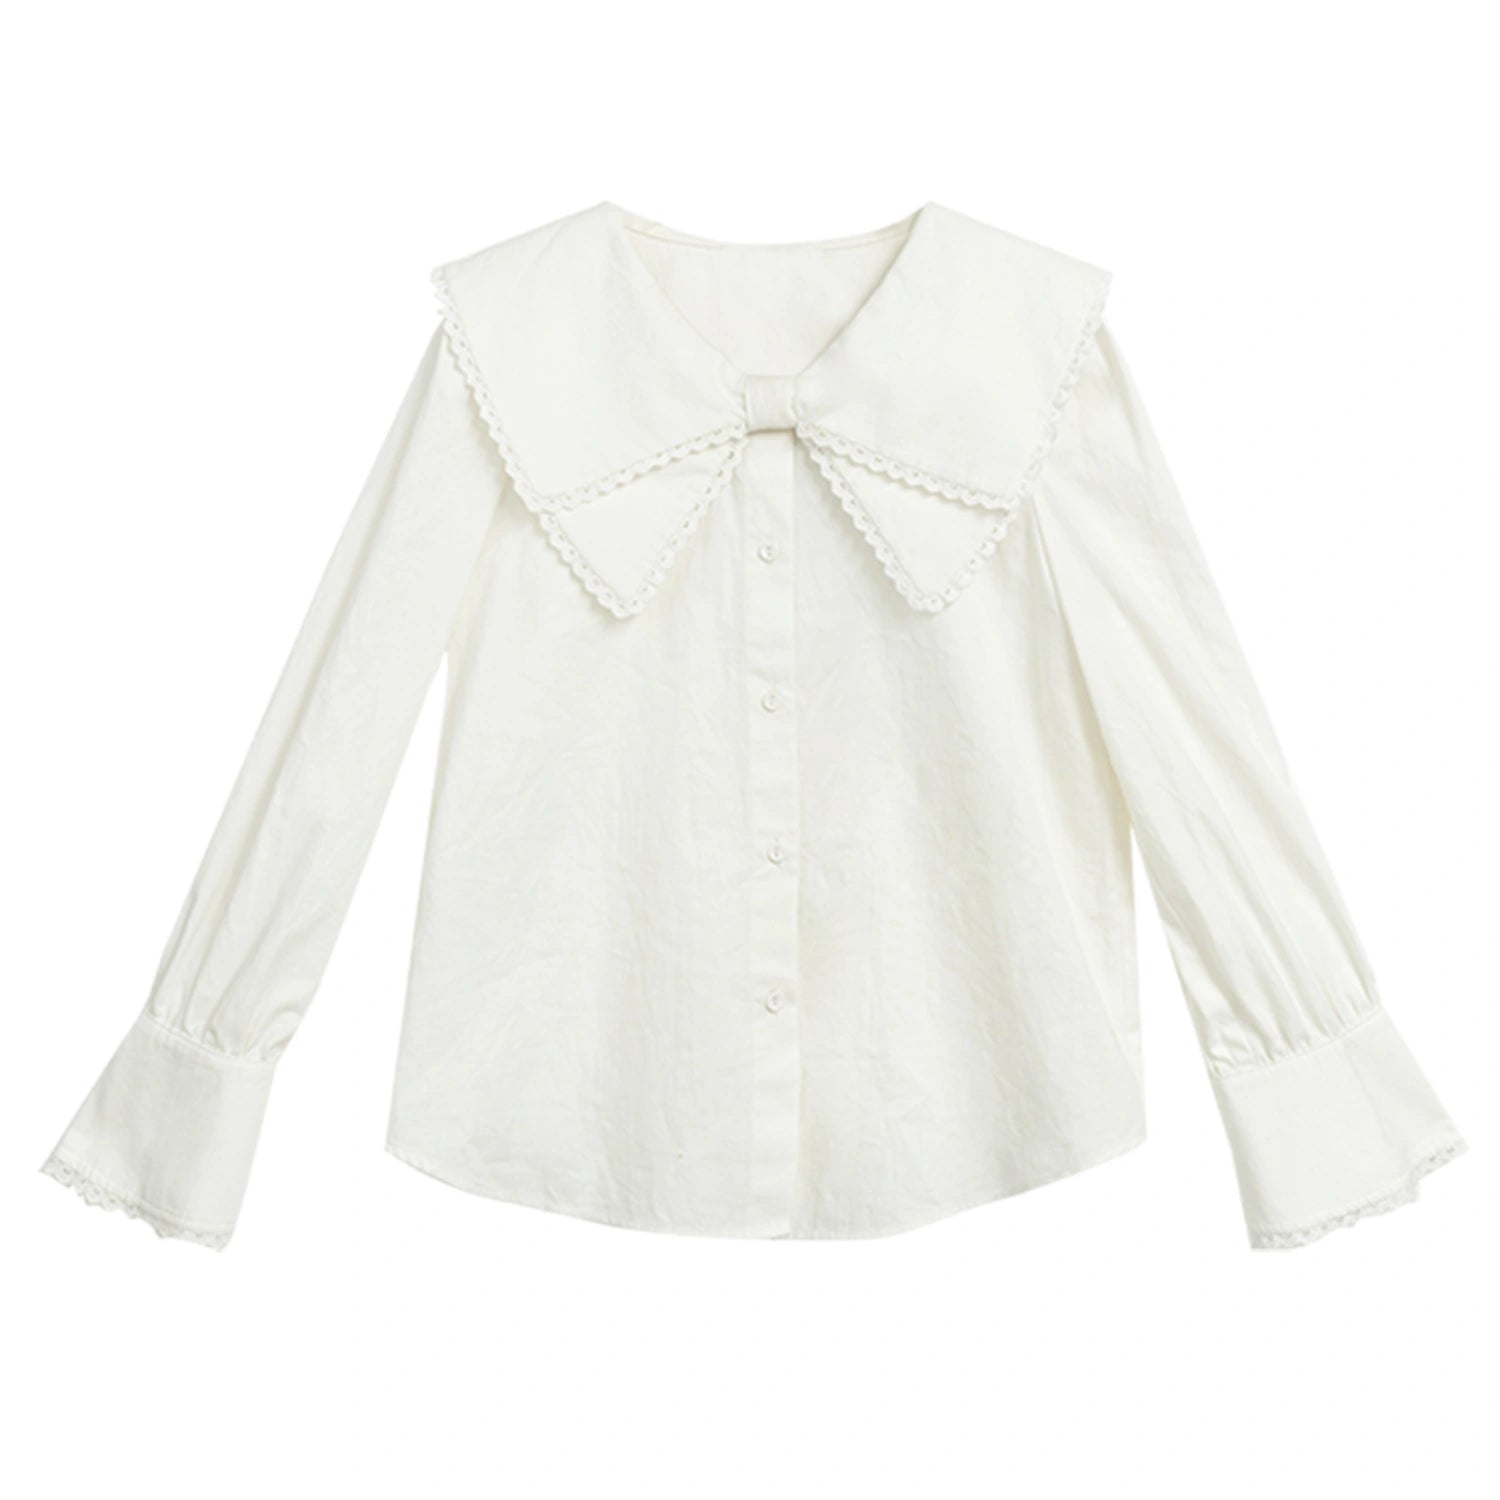 Vintage-Inspired Blouse with Scalloped Collar and Cuff Detail